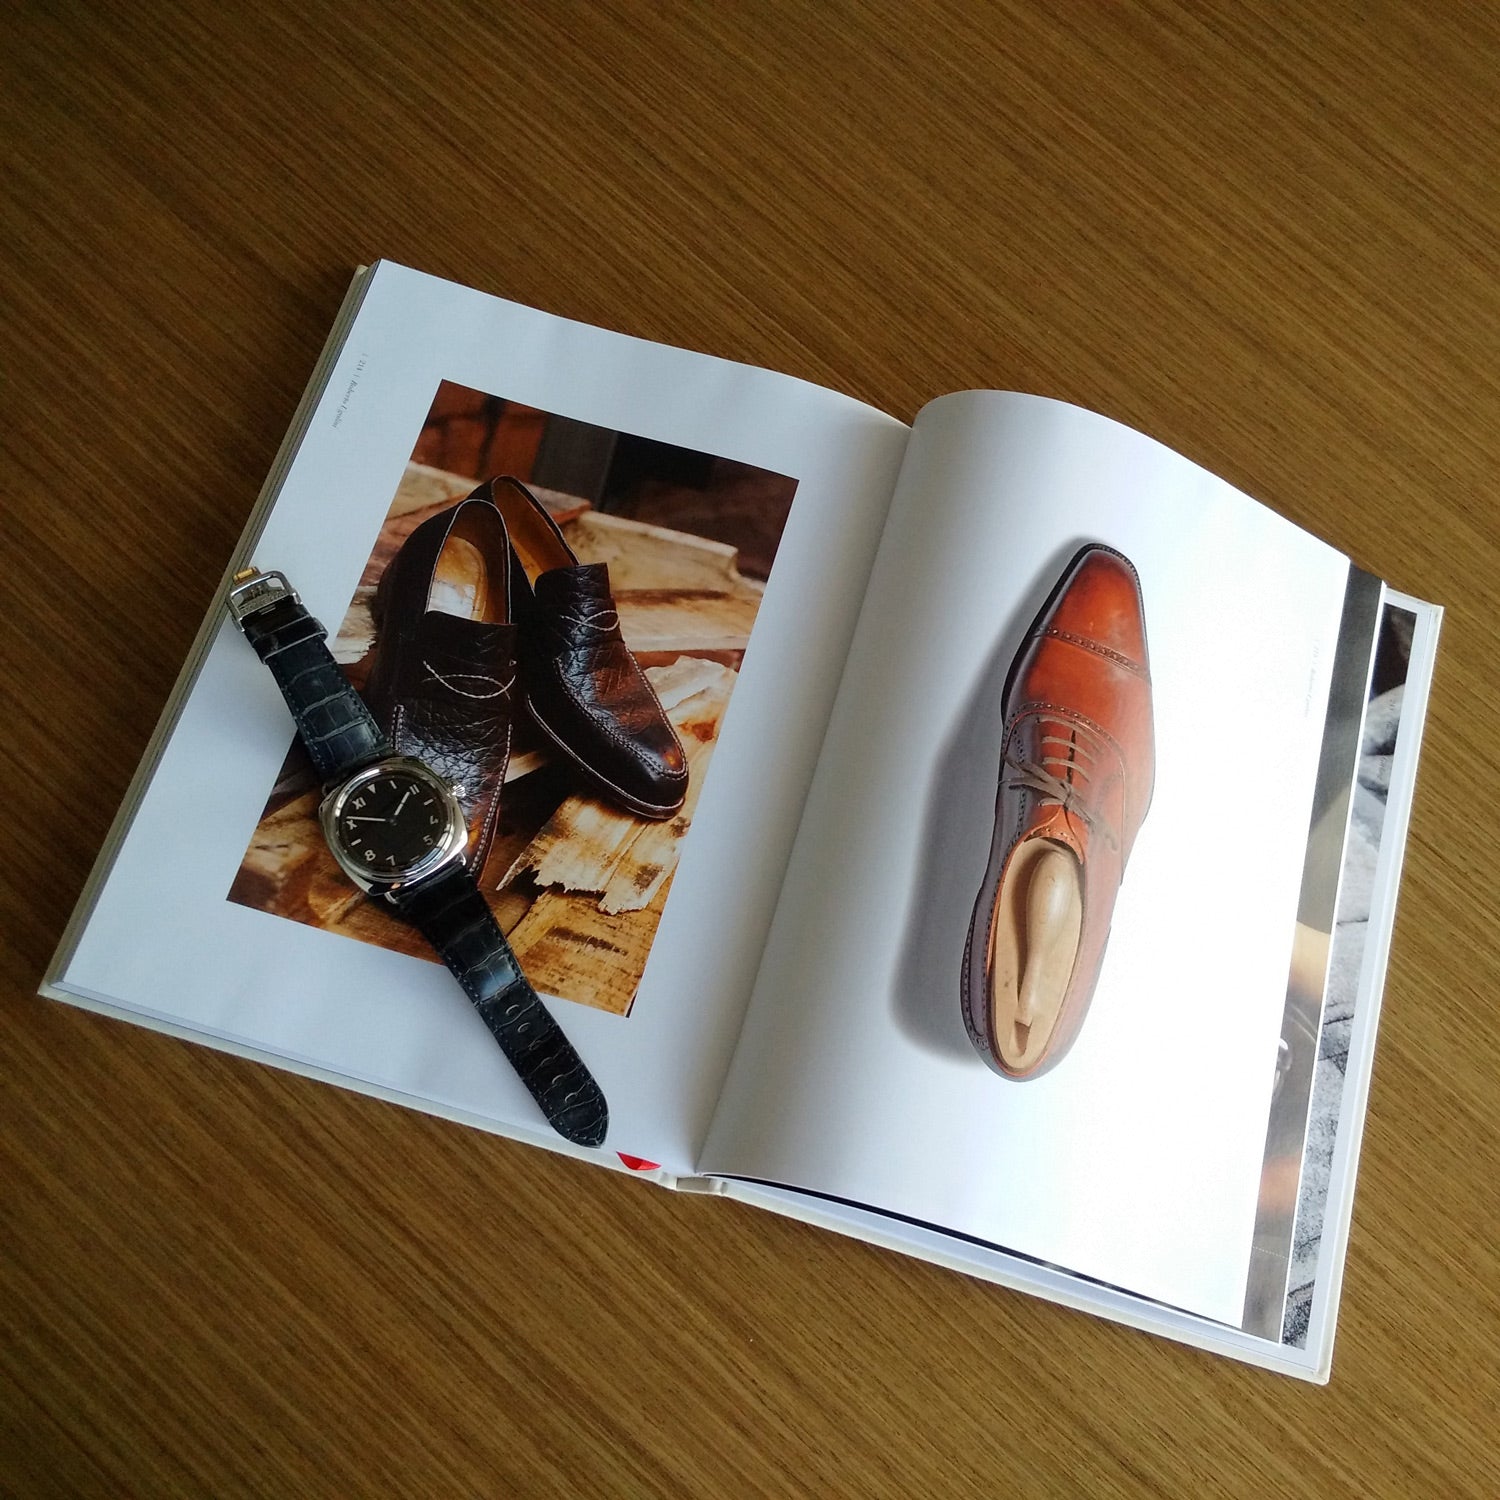 A photobook showcasing Master Shoemakers: The Art and Soul of Bespoke Shoes made by expert shoemakers, with a watch from KirbyAllison.com as an added accessory.